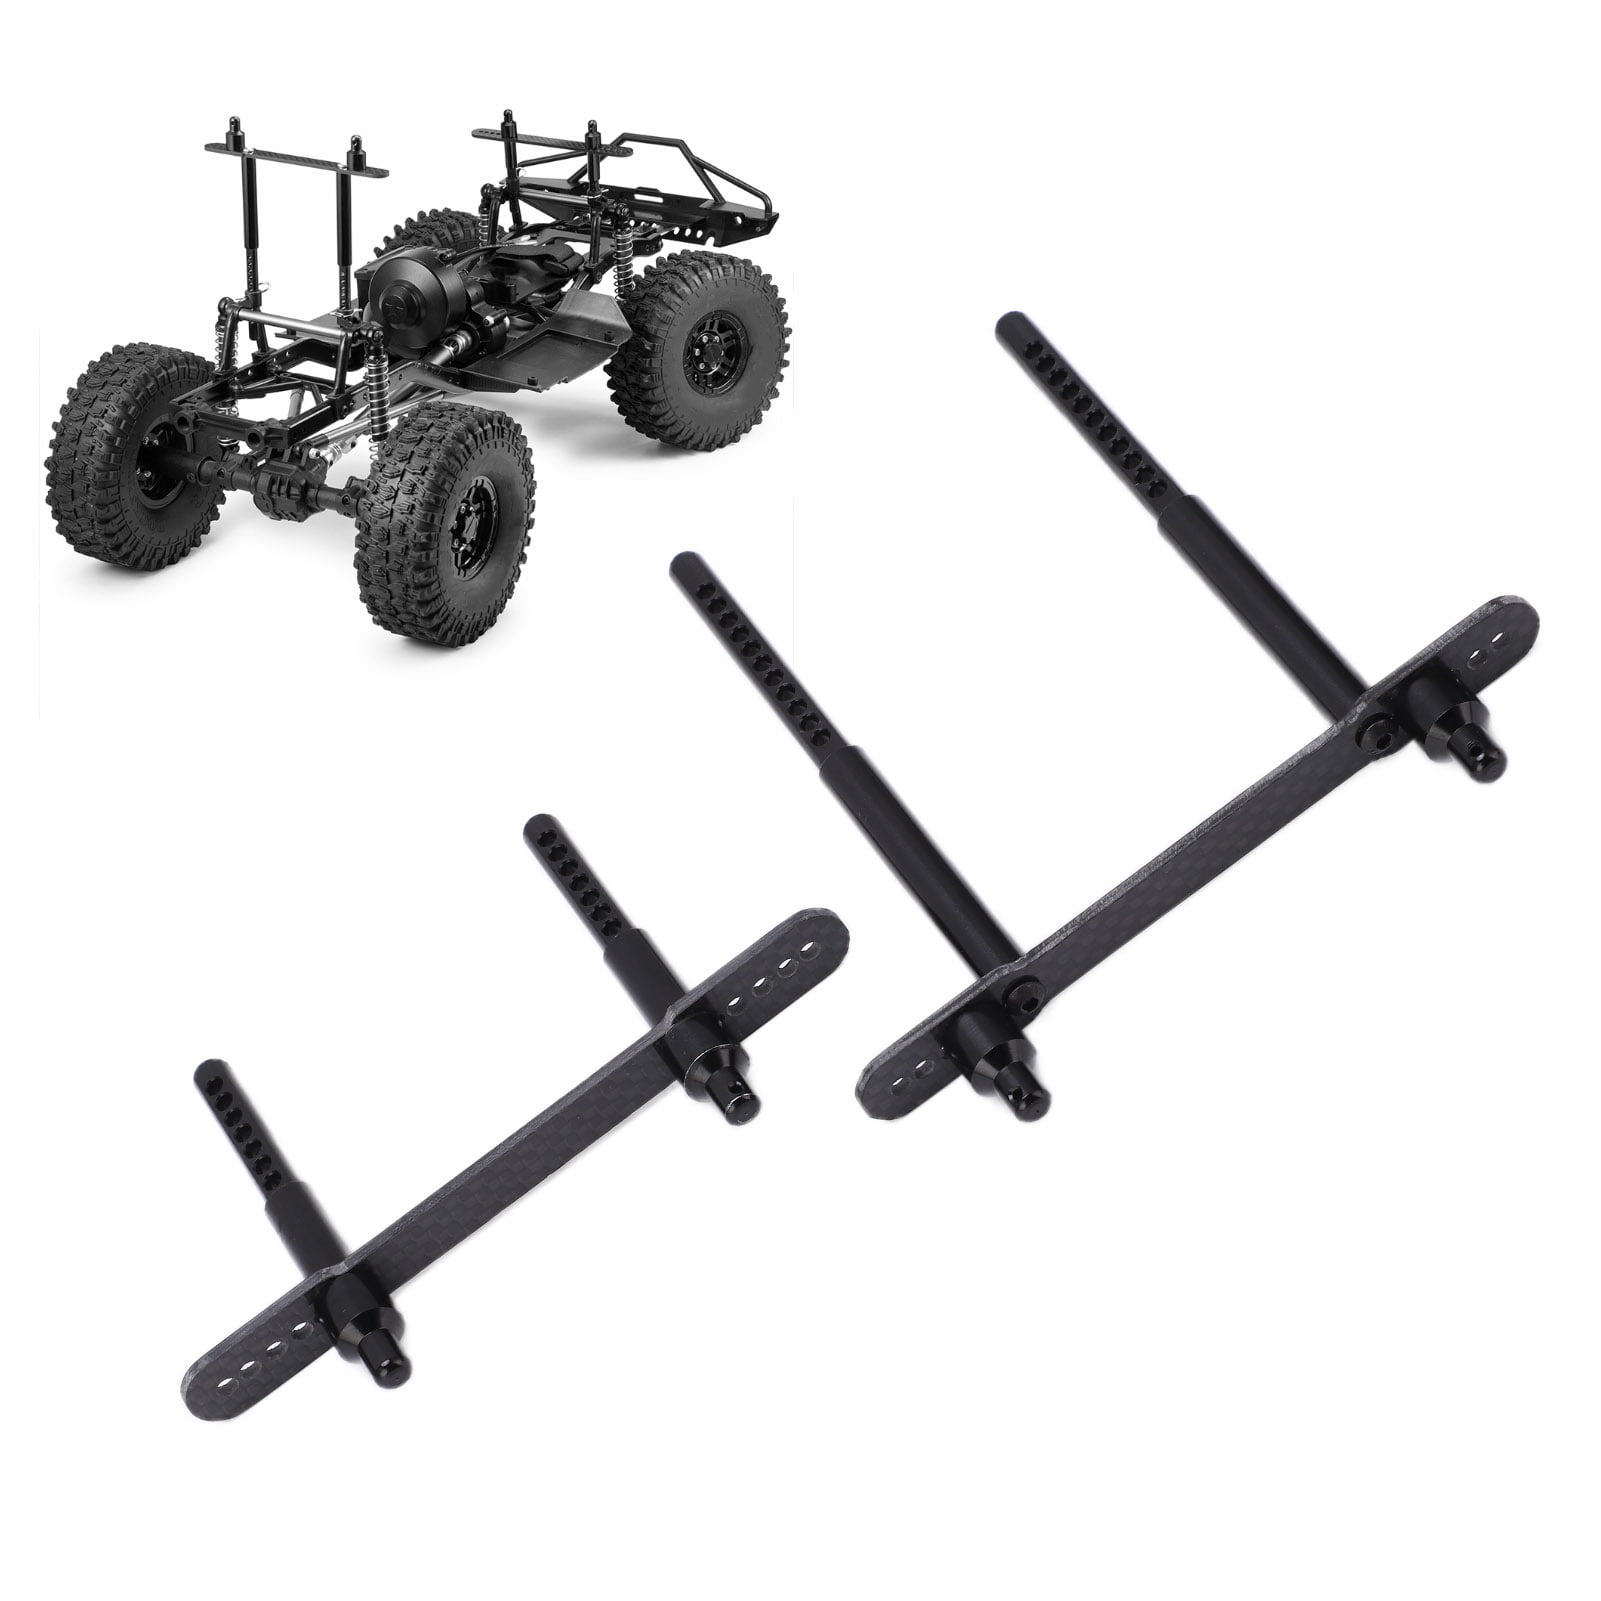 Black RC-Hub 1Set Body Post Mounts Metal Front and Rear Shell Column for 1:10 Axial SCX10 90046 90047 RC Car 